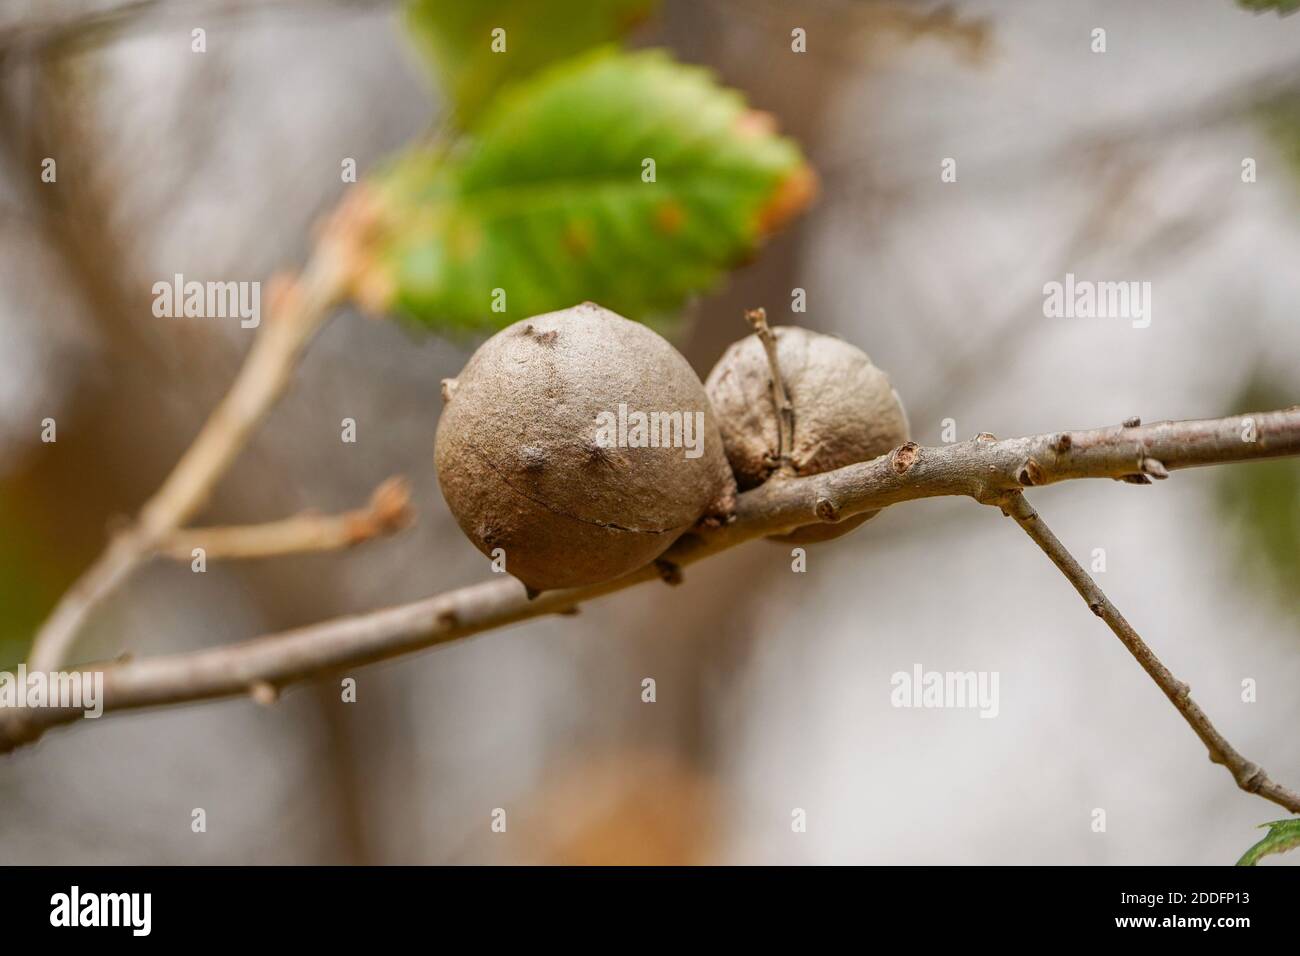 Gall wasp, Twig galls (Oak apple or oak  gall) on a branch, from gall wasp sp. gallflies, Spain. Stock Photo